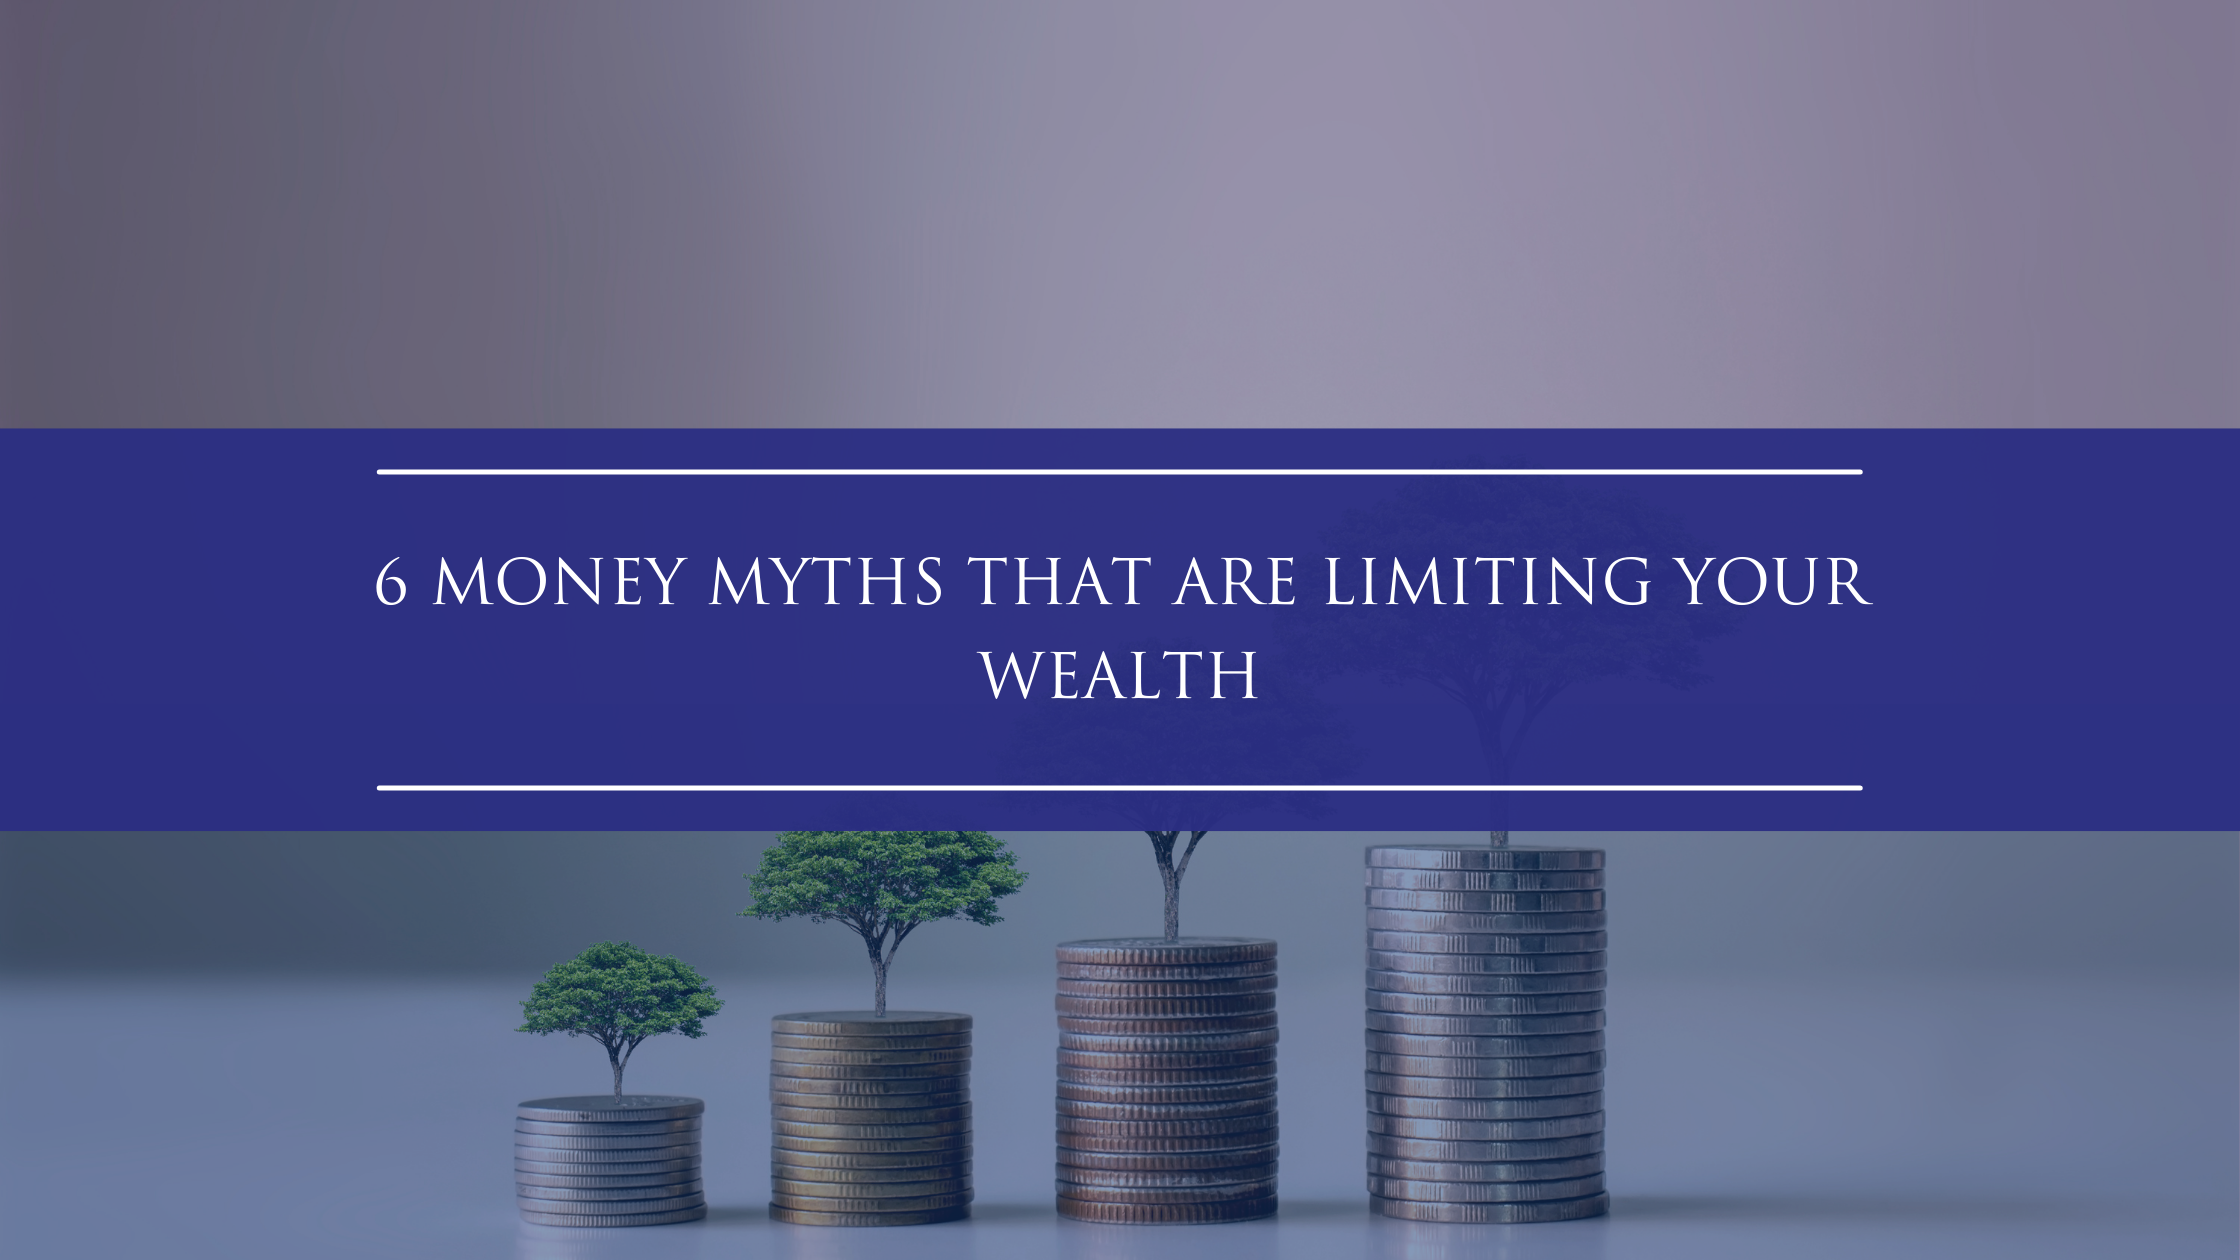 6 Money Myths That Are Limiting Your Wealth